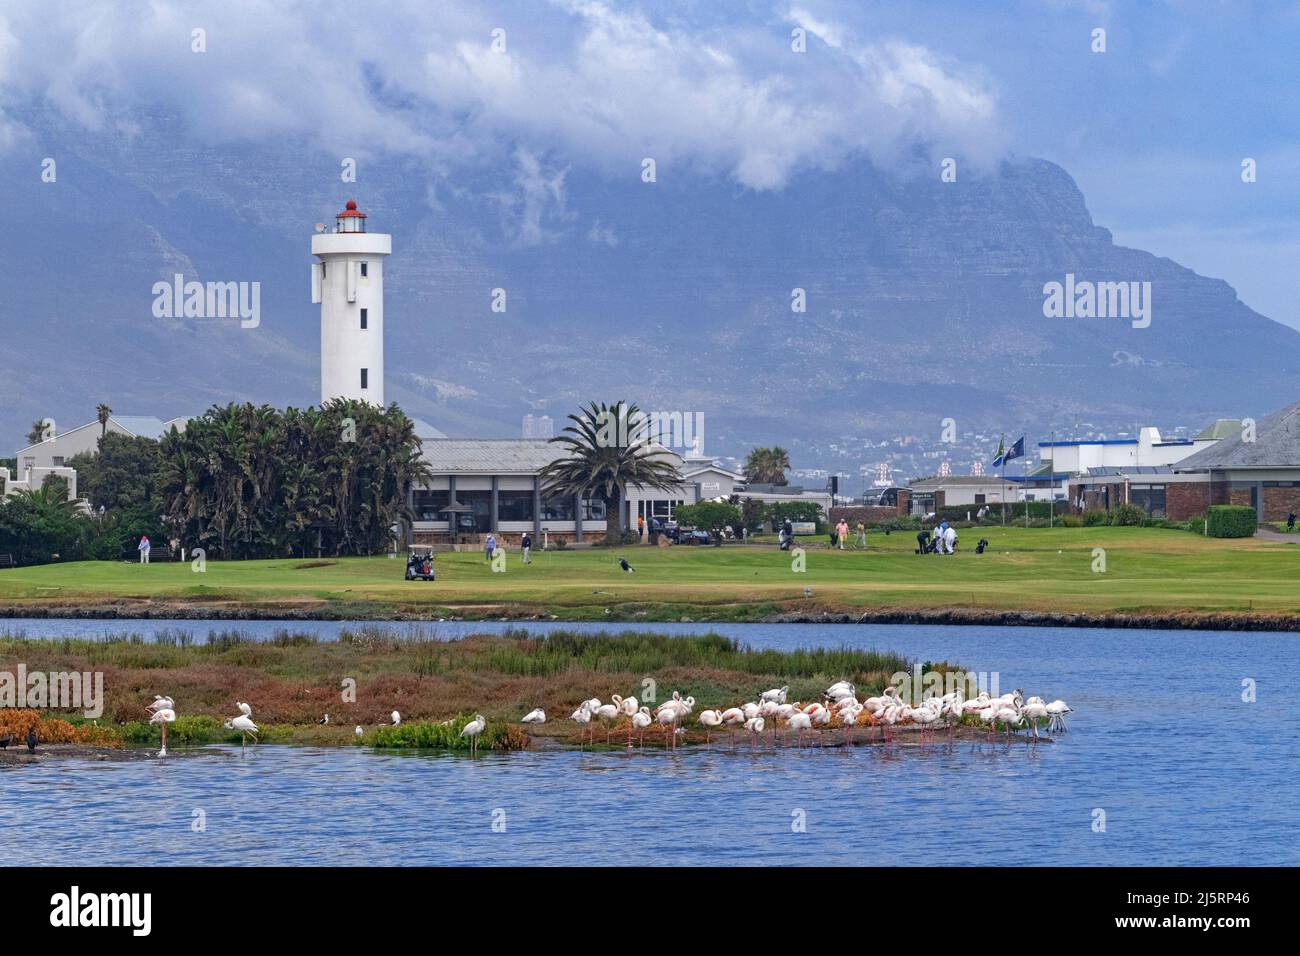 Milnerton Lighthouse on Table Bay and greater flamingos at the Golf Club on Woodbridge Island near Cape Town / Kaapstad, Western Cape, South Africa Stock Photo